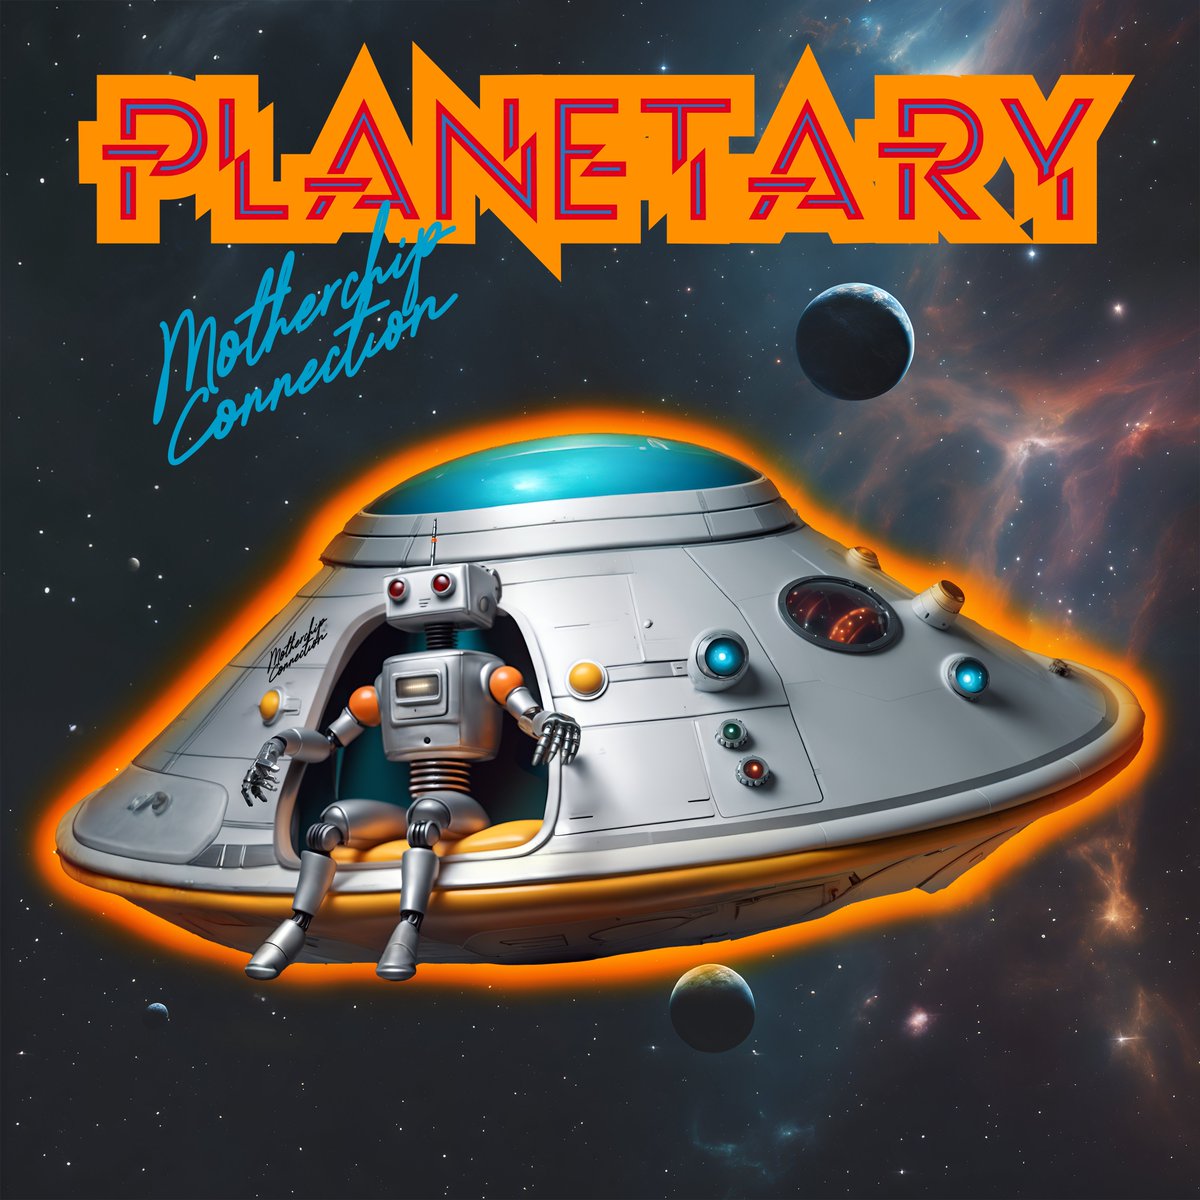 Today's Robotic Album Cover: 
Planetary - Motherchip Connection 

Inspired by: Parliament-Funkadelic - Mothership Connection, released December 15th 1975 

#Retro #Robot #AlbumArt

#RetroBot